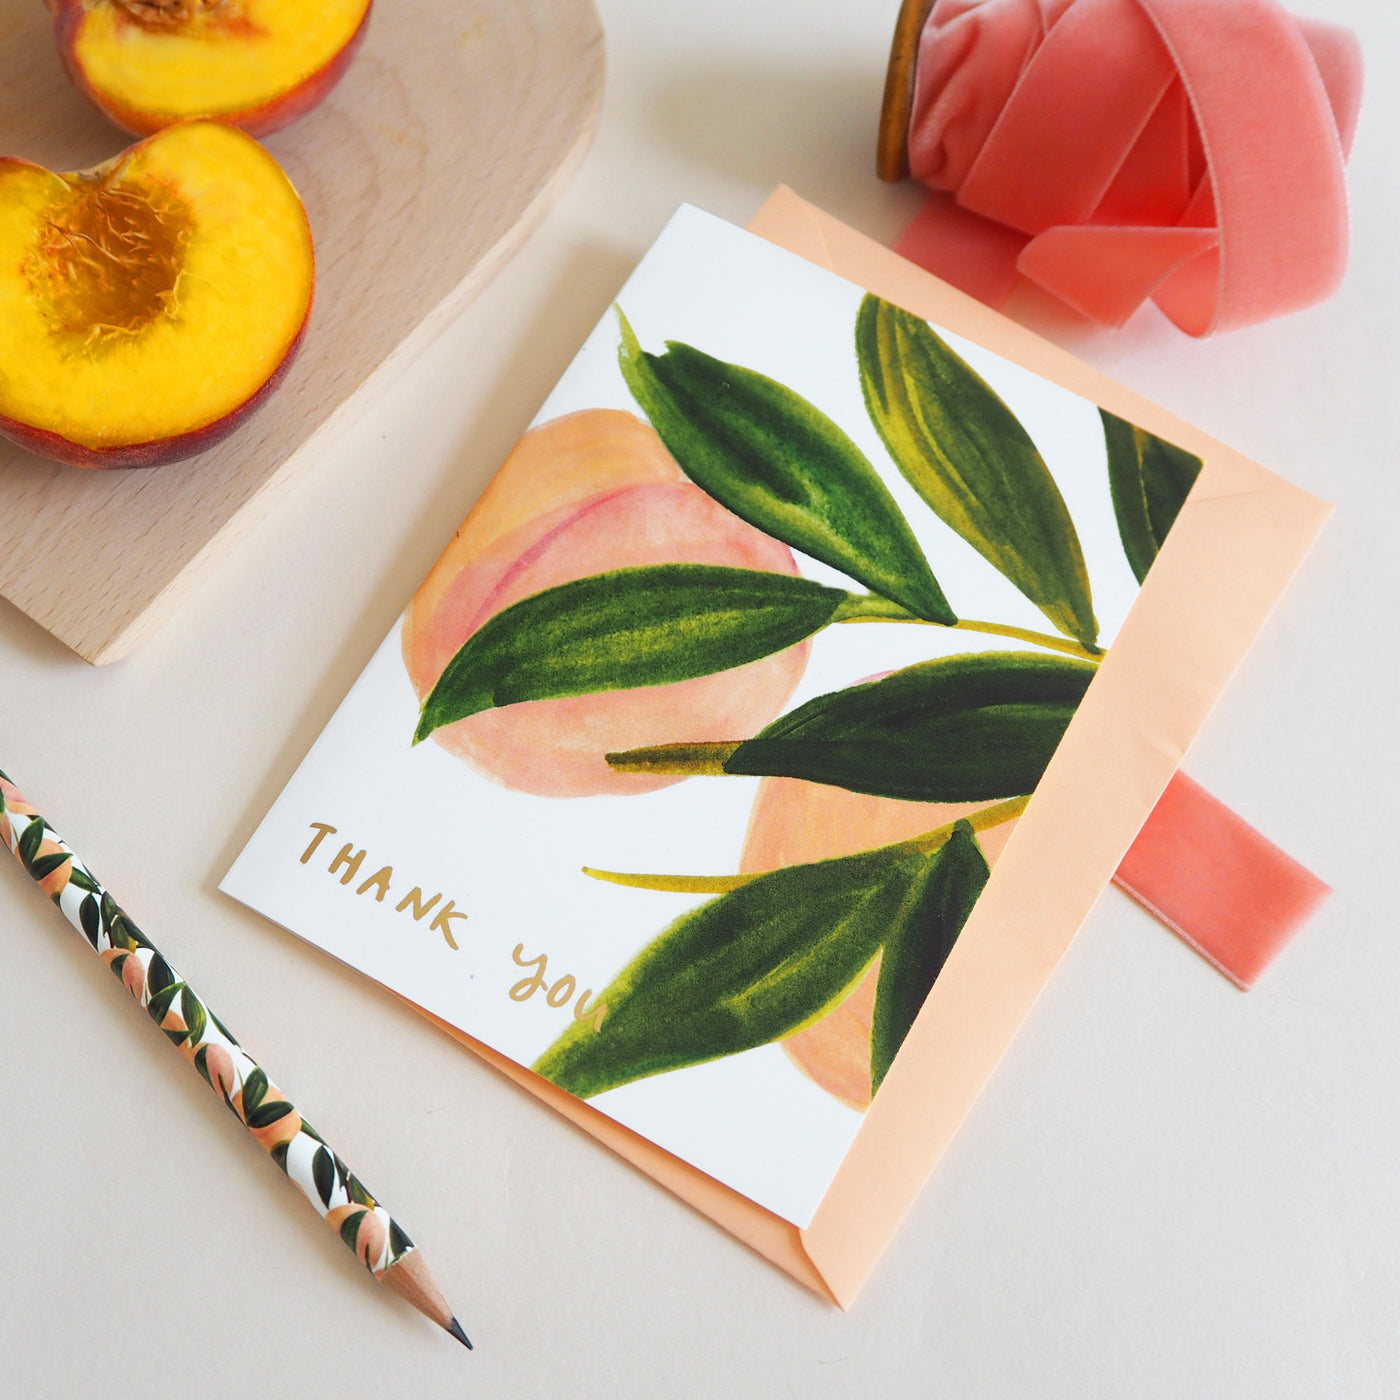 Illustrated Peach and Green Leaf Card With Thank You In Gold Lettering With Peach Envelope With Matching Pencil And Peach Halves - Annie Dornan Smith